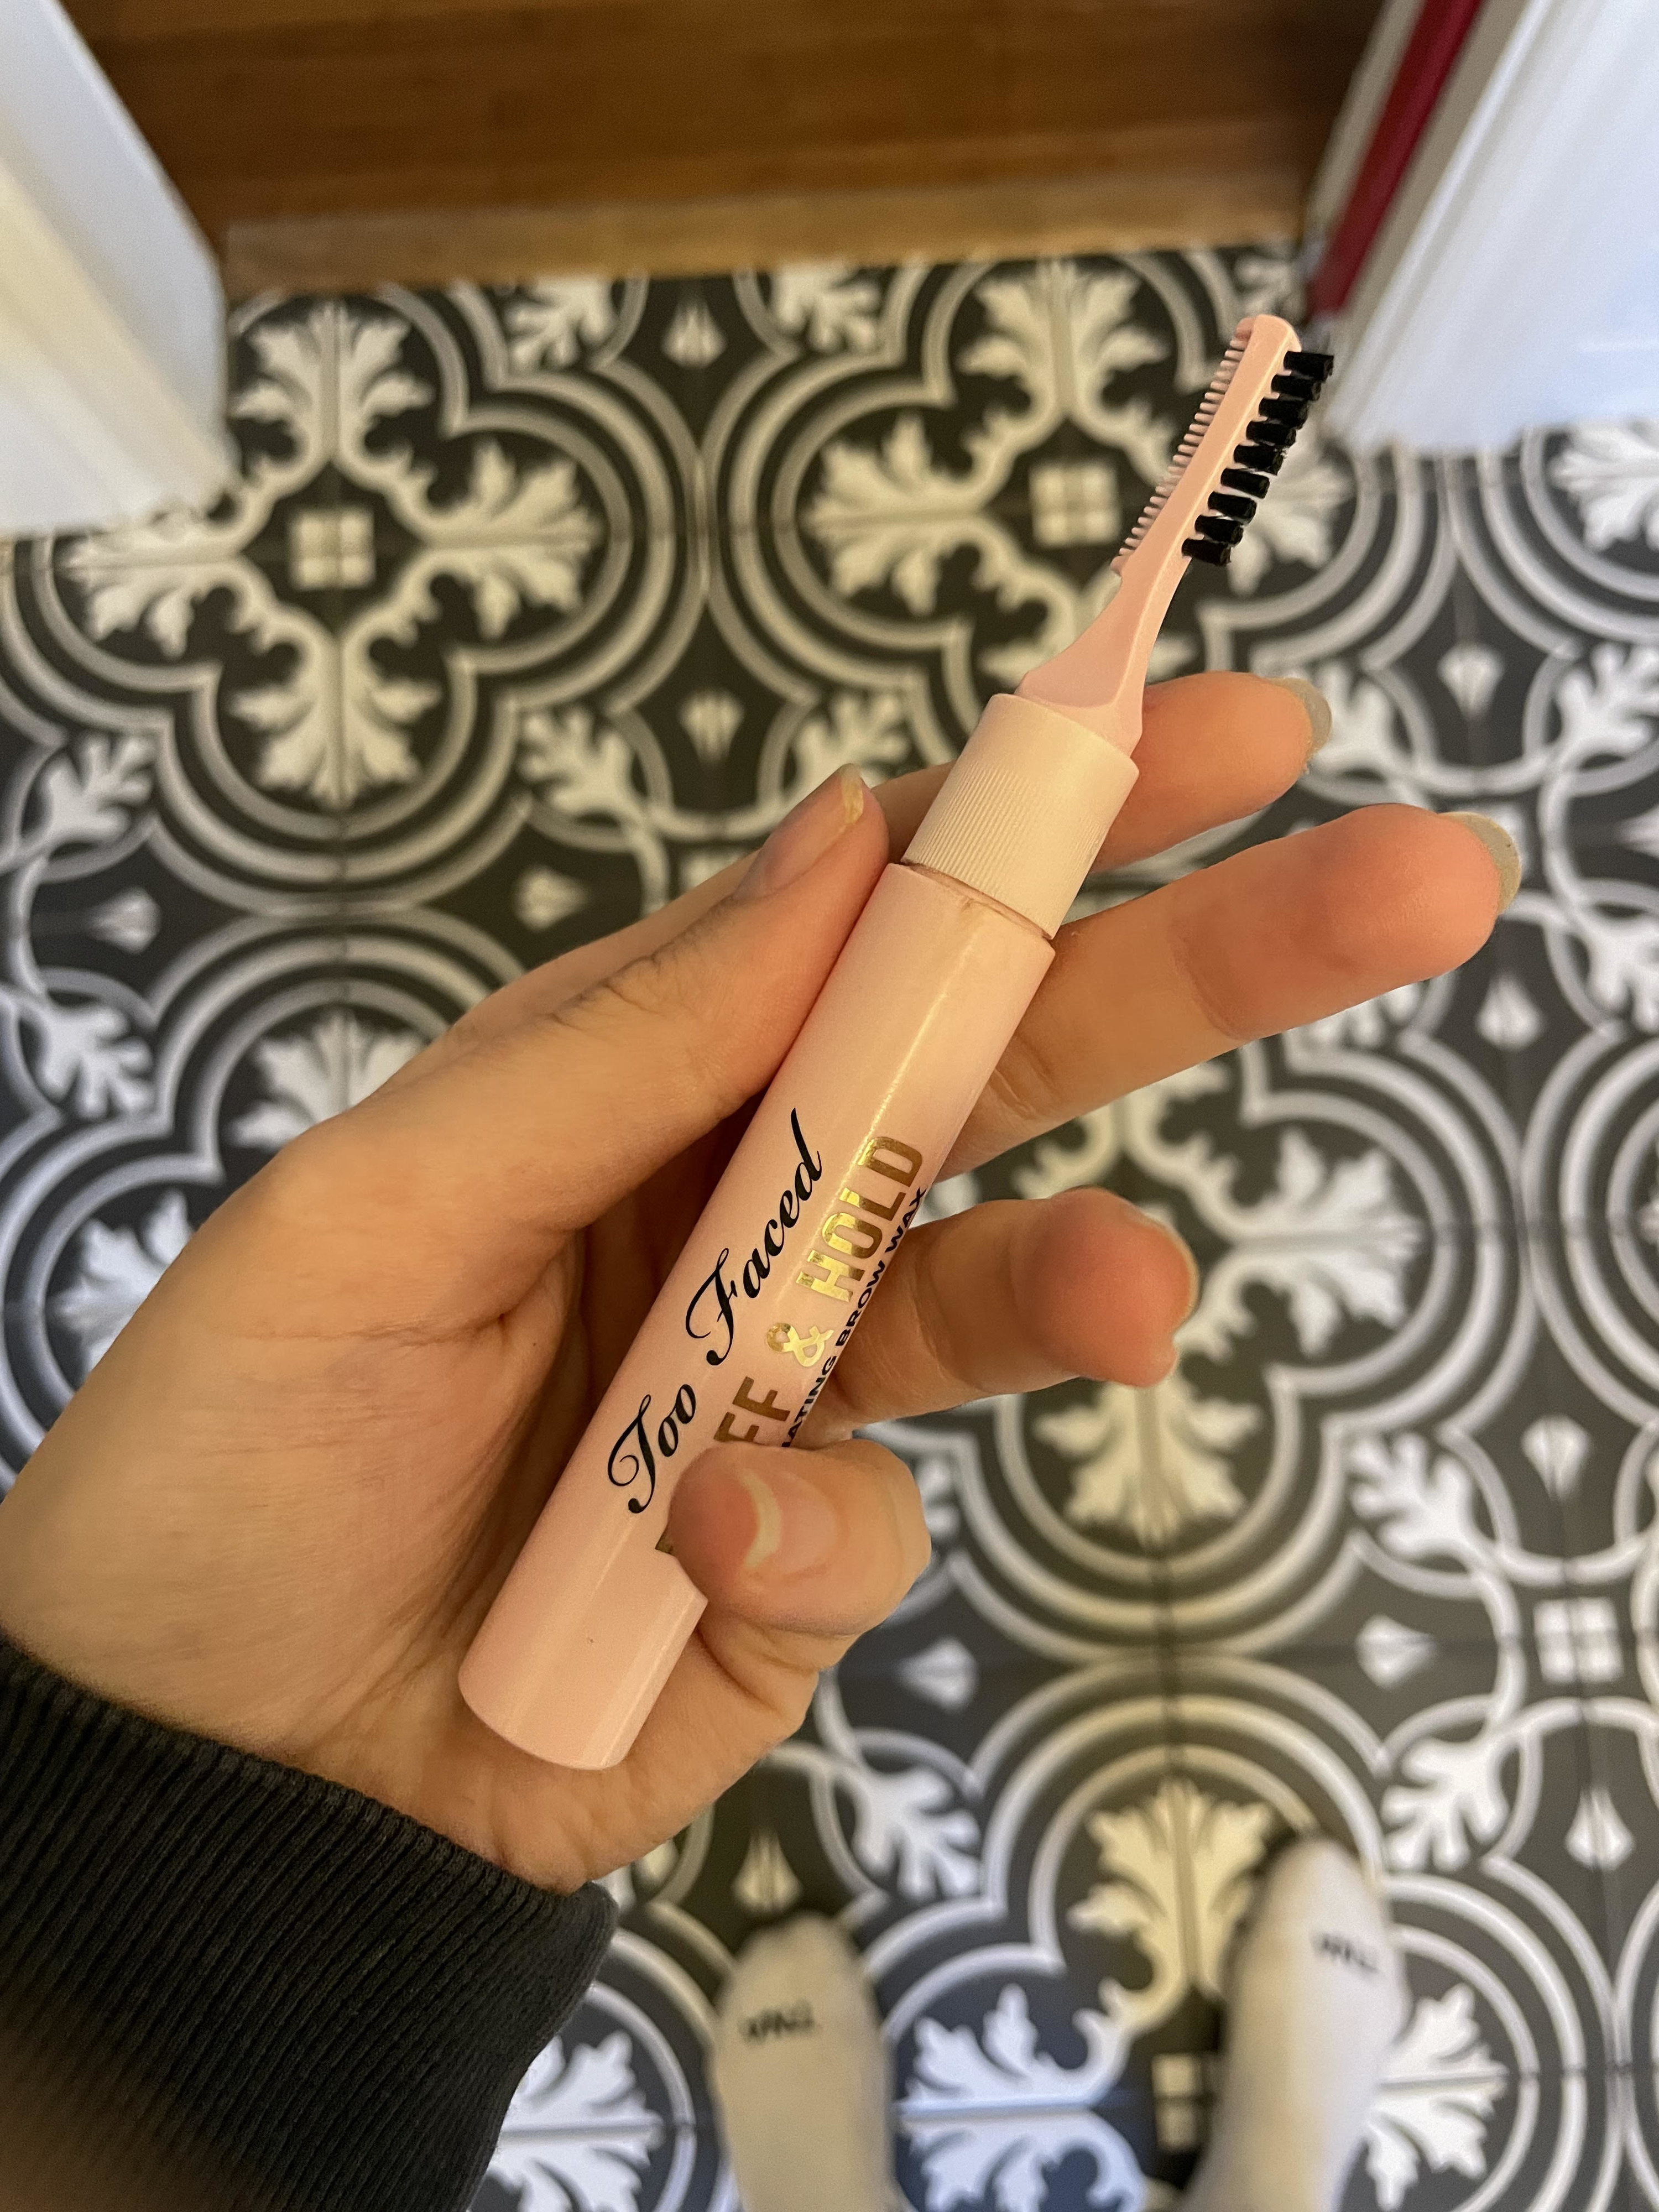 Alice holding the Too Faced brow gel